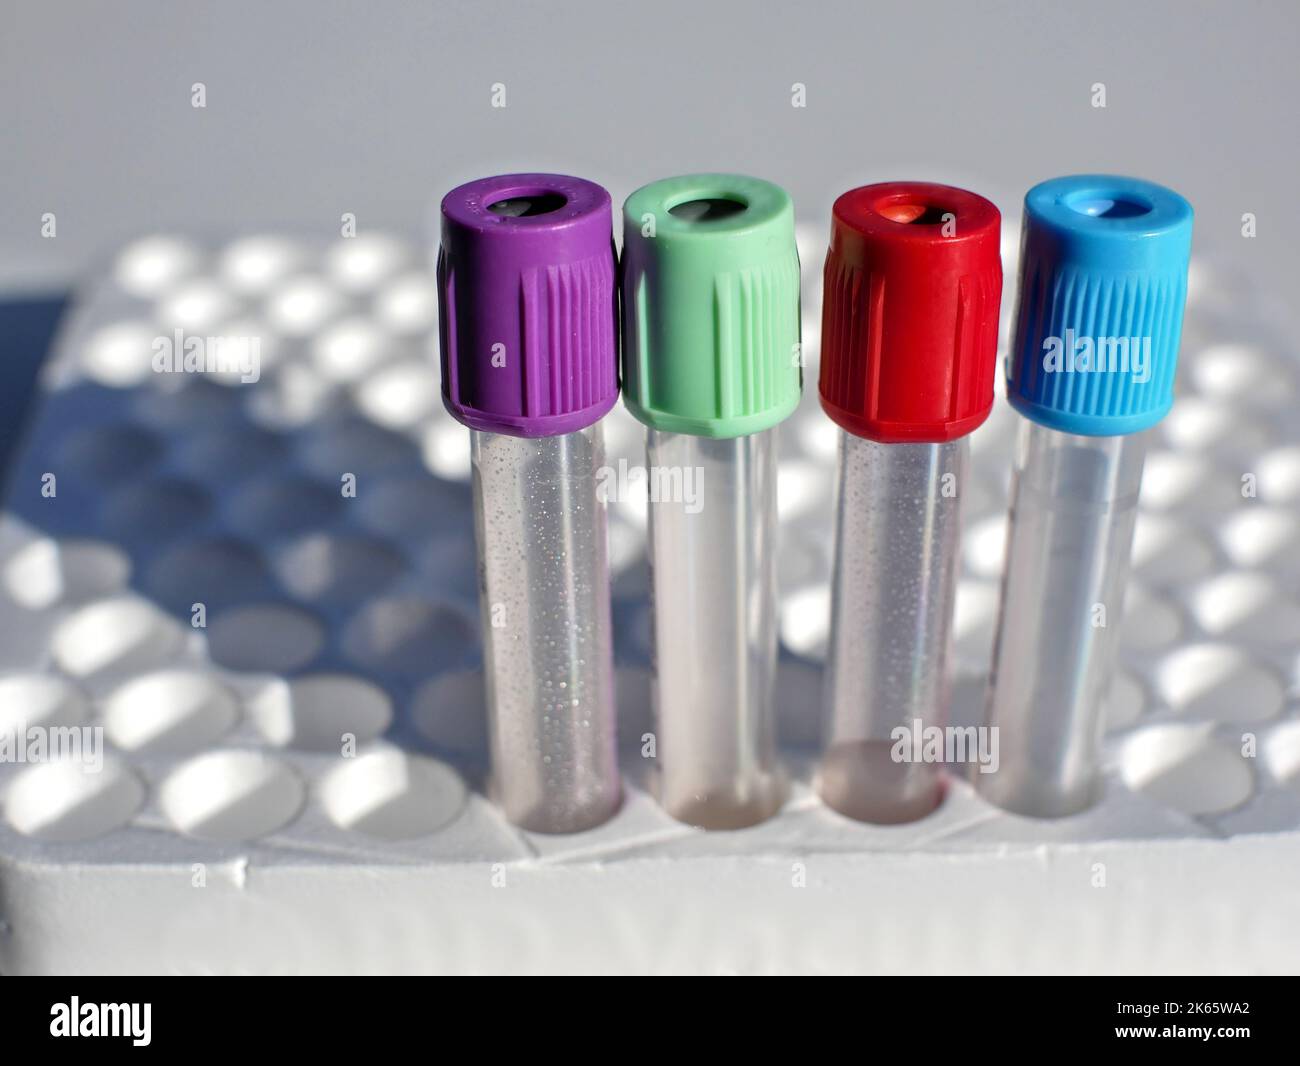 Blood collection tubes with colored stoppers, on a polystyrene support Stock Photo